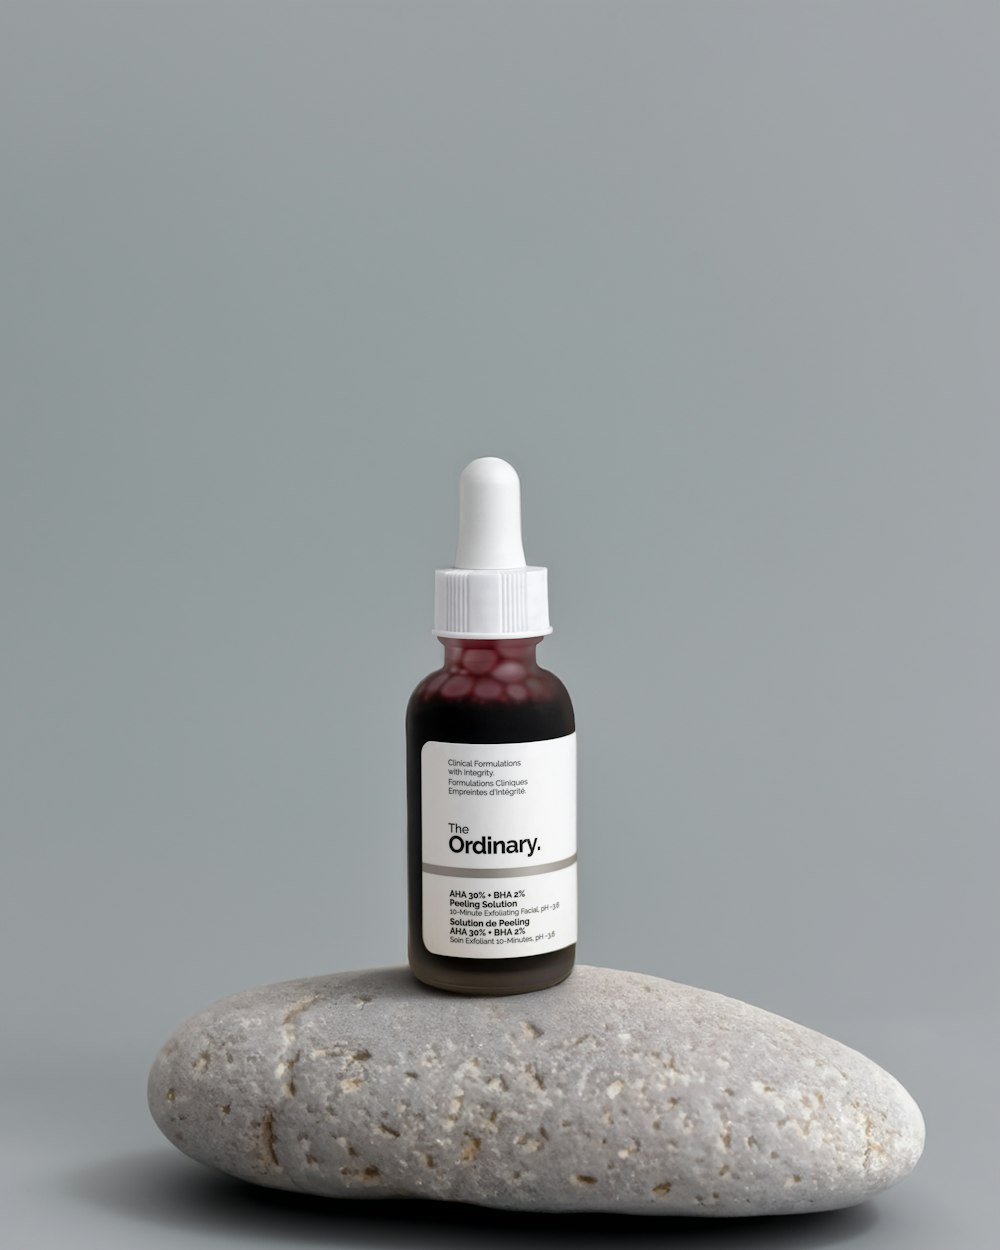 a bottle of vitamin oil sitting on top of a rock